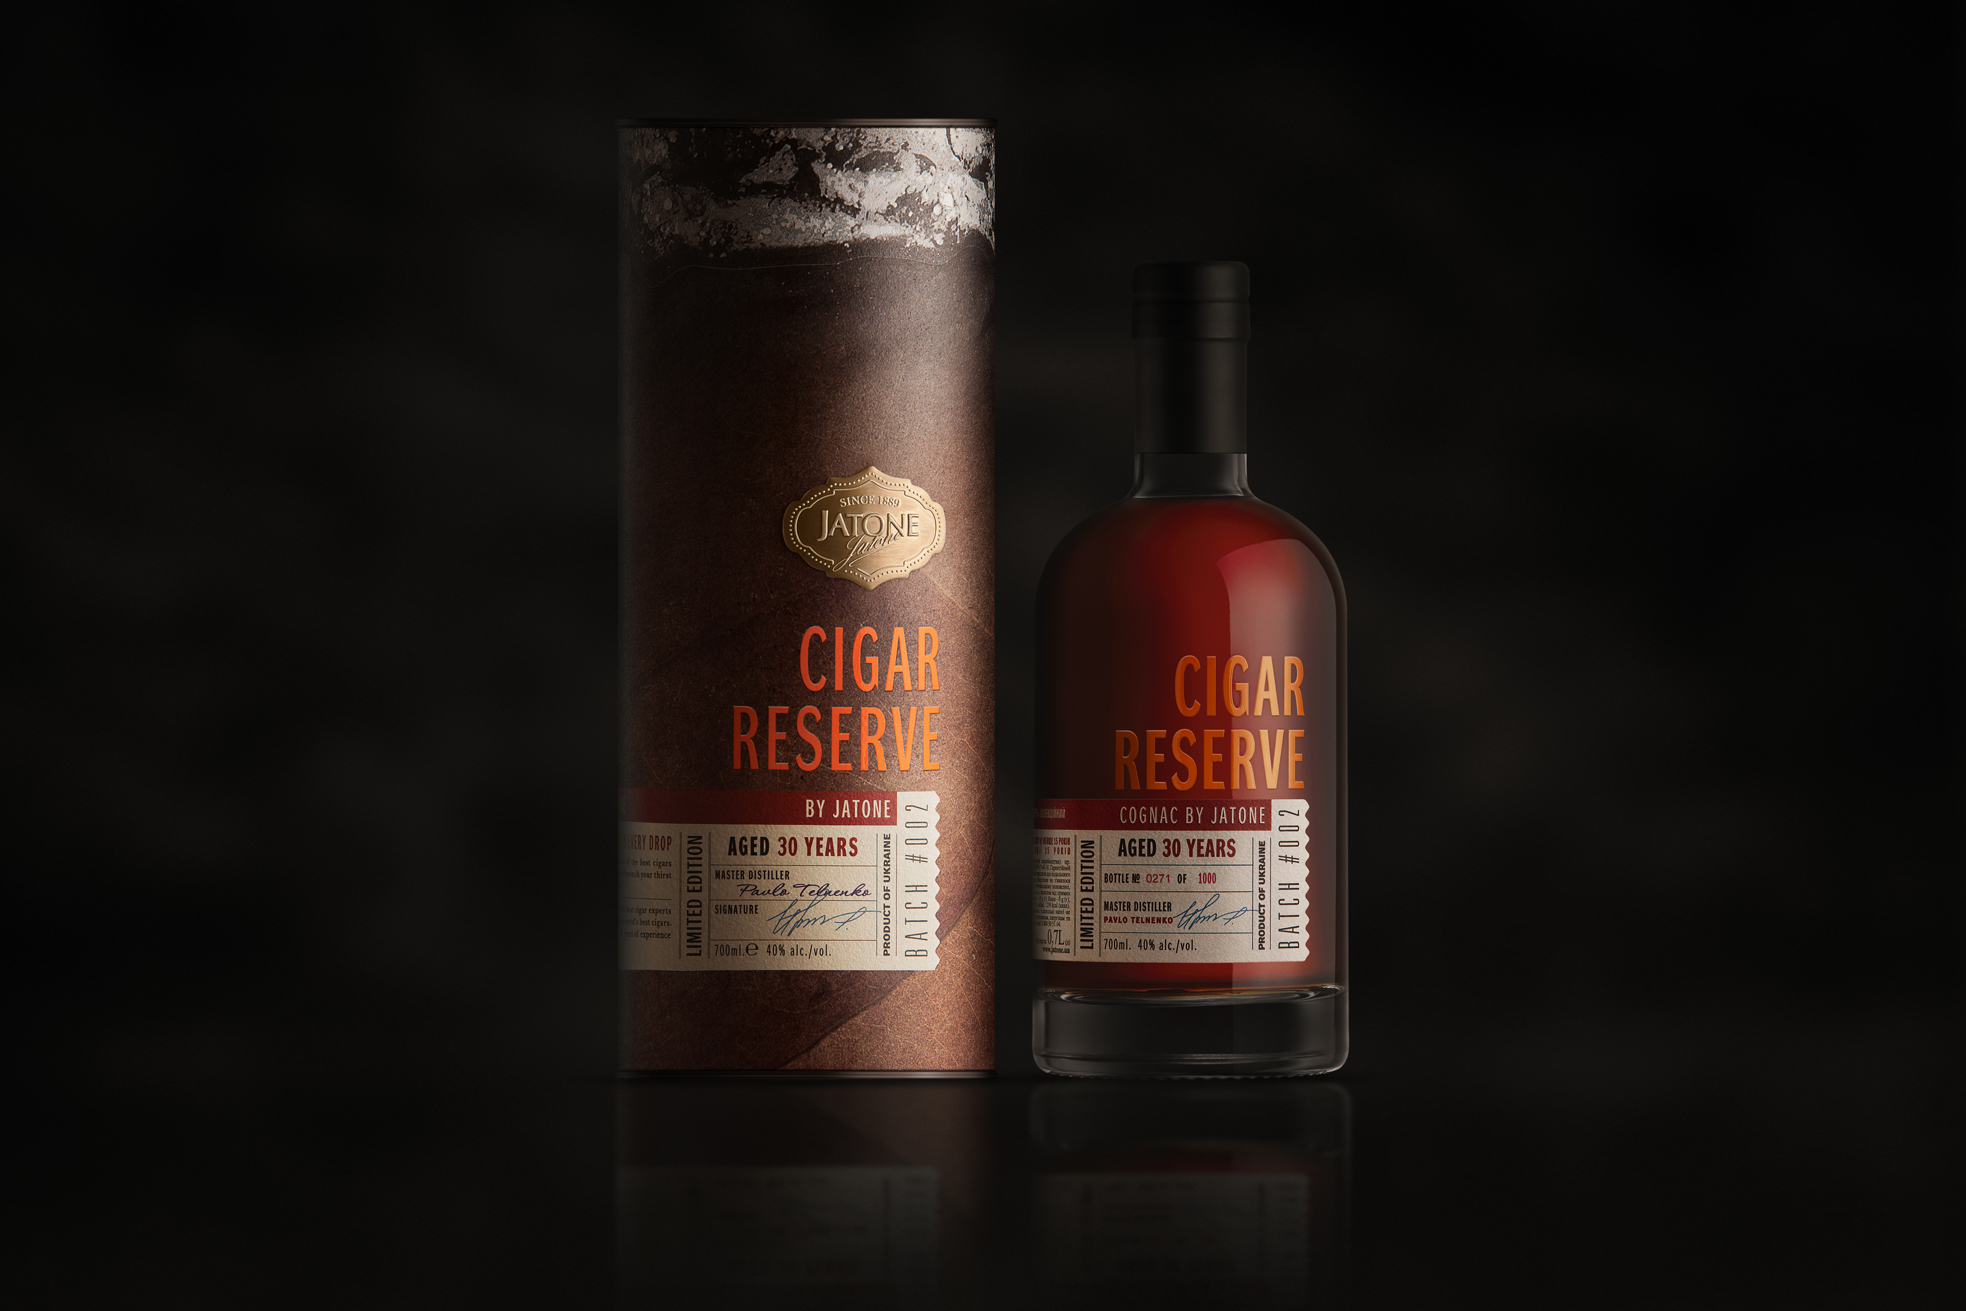 Krylia FMCG Branding Create Packaging Design for the First Brandy in Ukraine Created by Brandy Masters and Cigar Experts